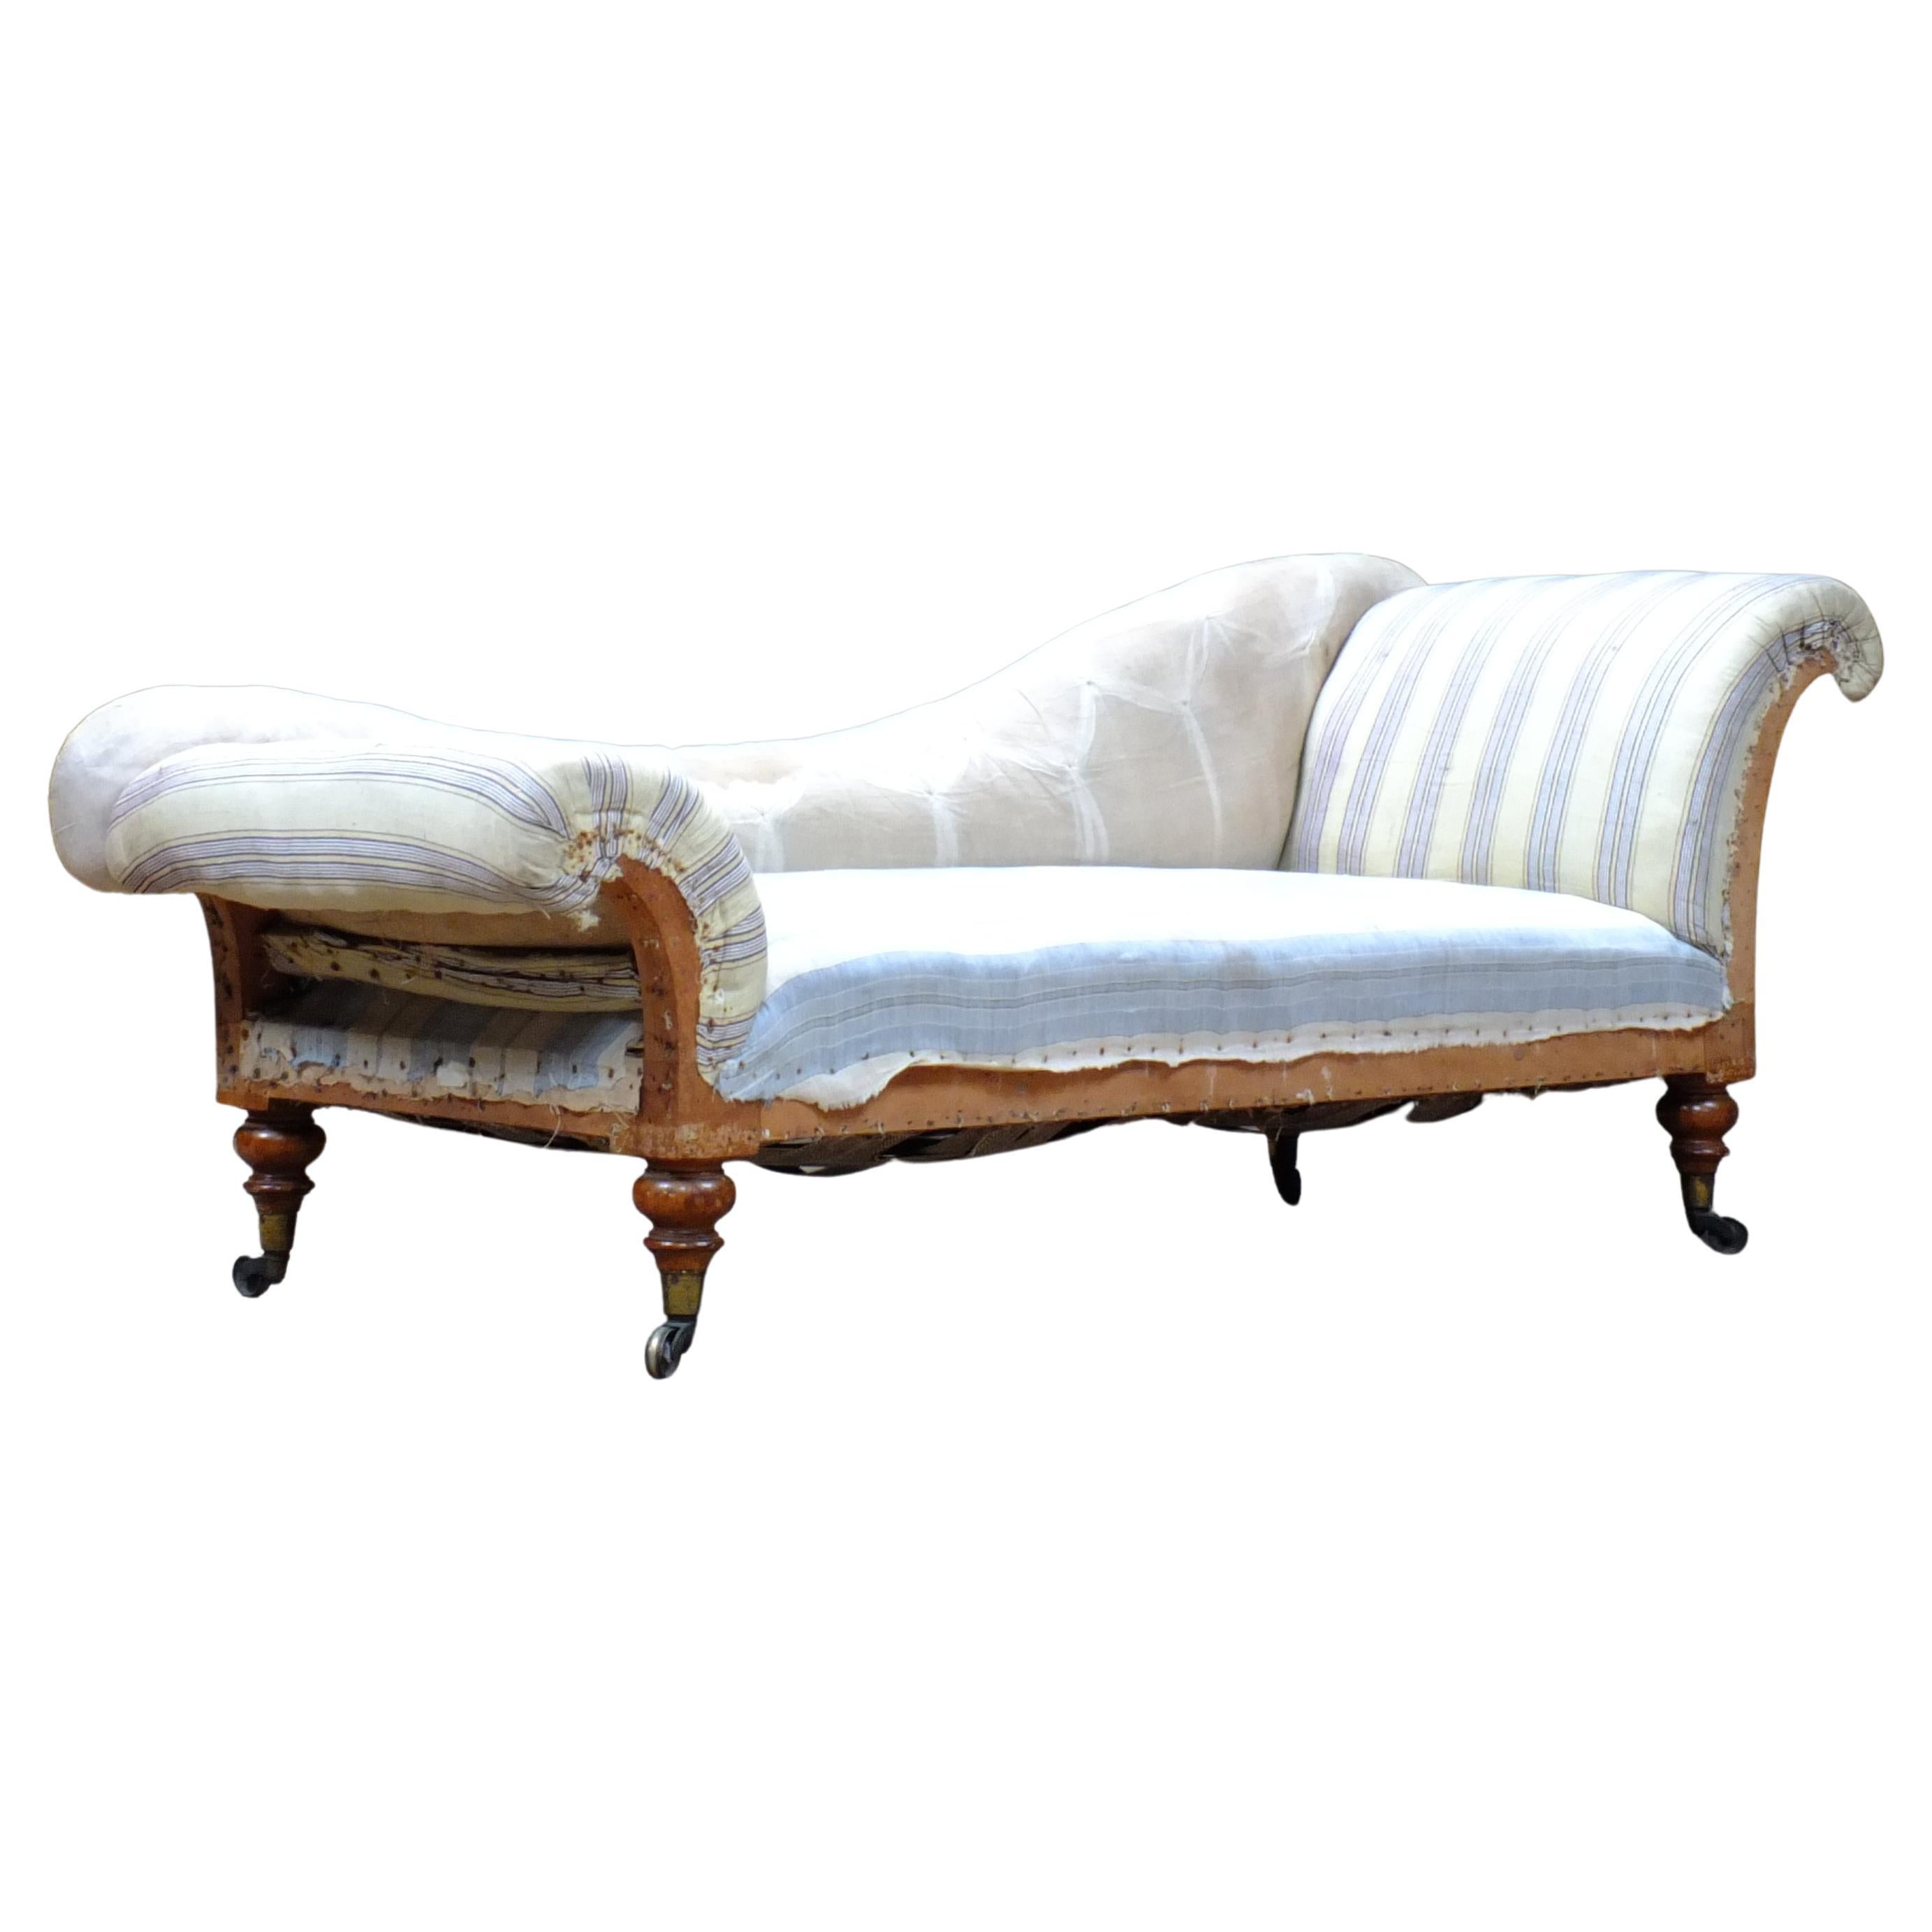 Antique 19th century sofa Chaise Lounge by C Hindley & Sons London C1860